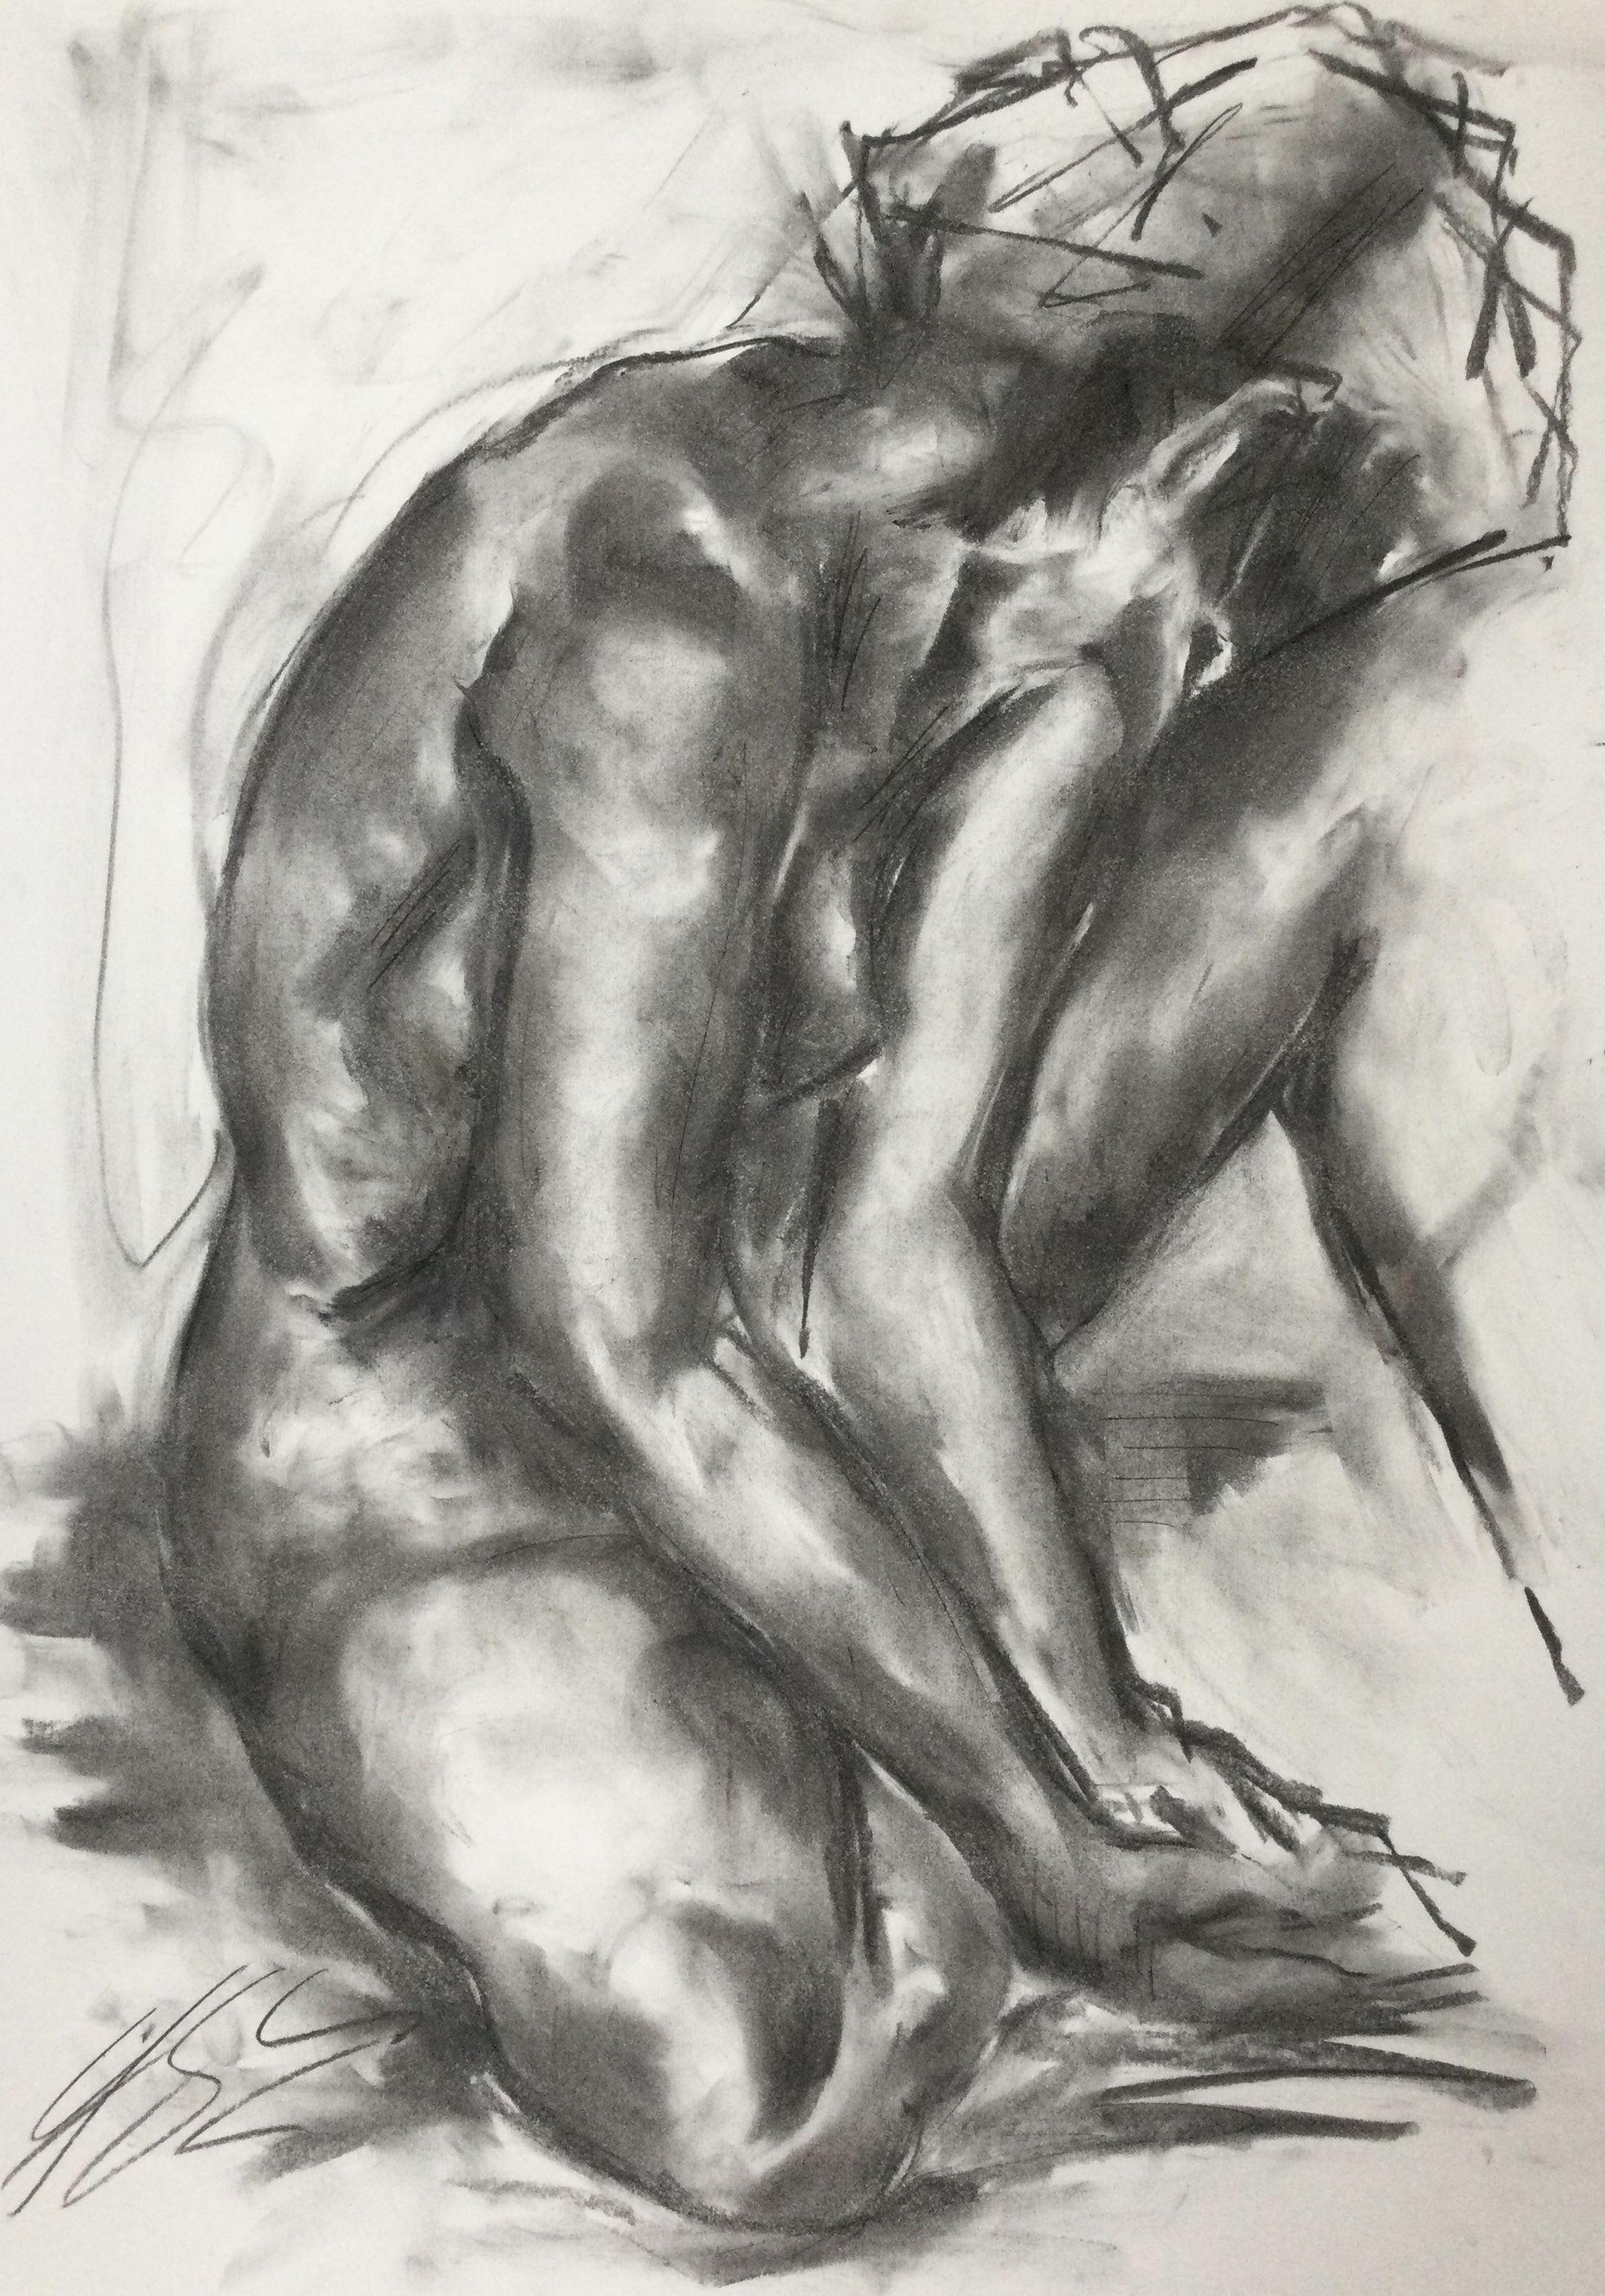 No Words, Drawing, Charcoal on Paper - Art by James Shipton